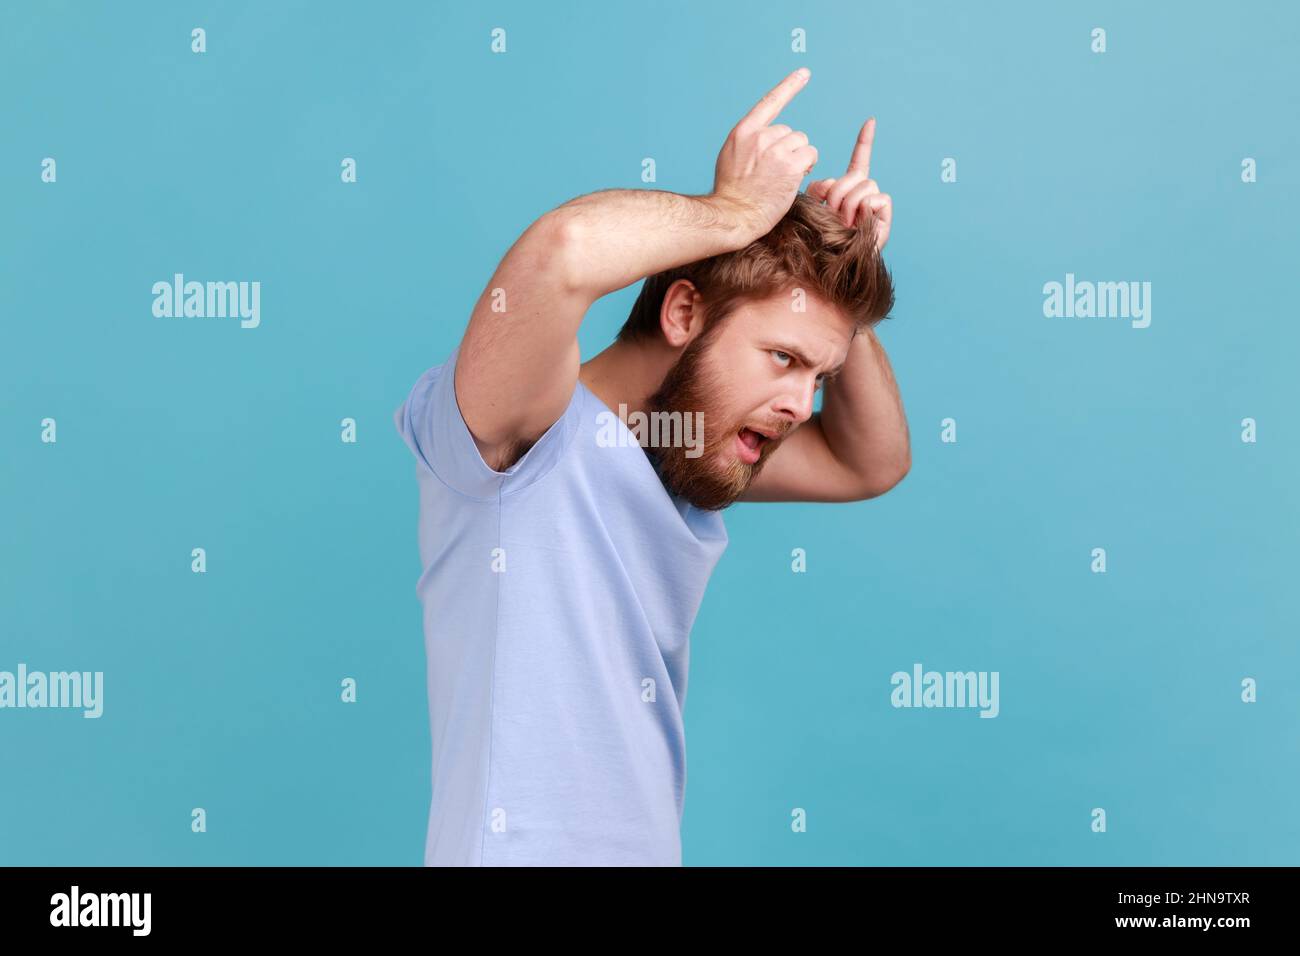 Side view of angry bully bearded man showing bull horn gesture with fingers over head, looking hostile and threatening, aggressive face. Indoor studio shot isolated on blue background. Stock Photo